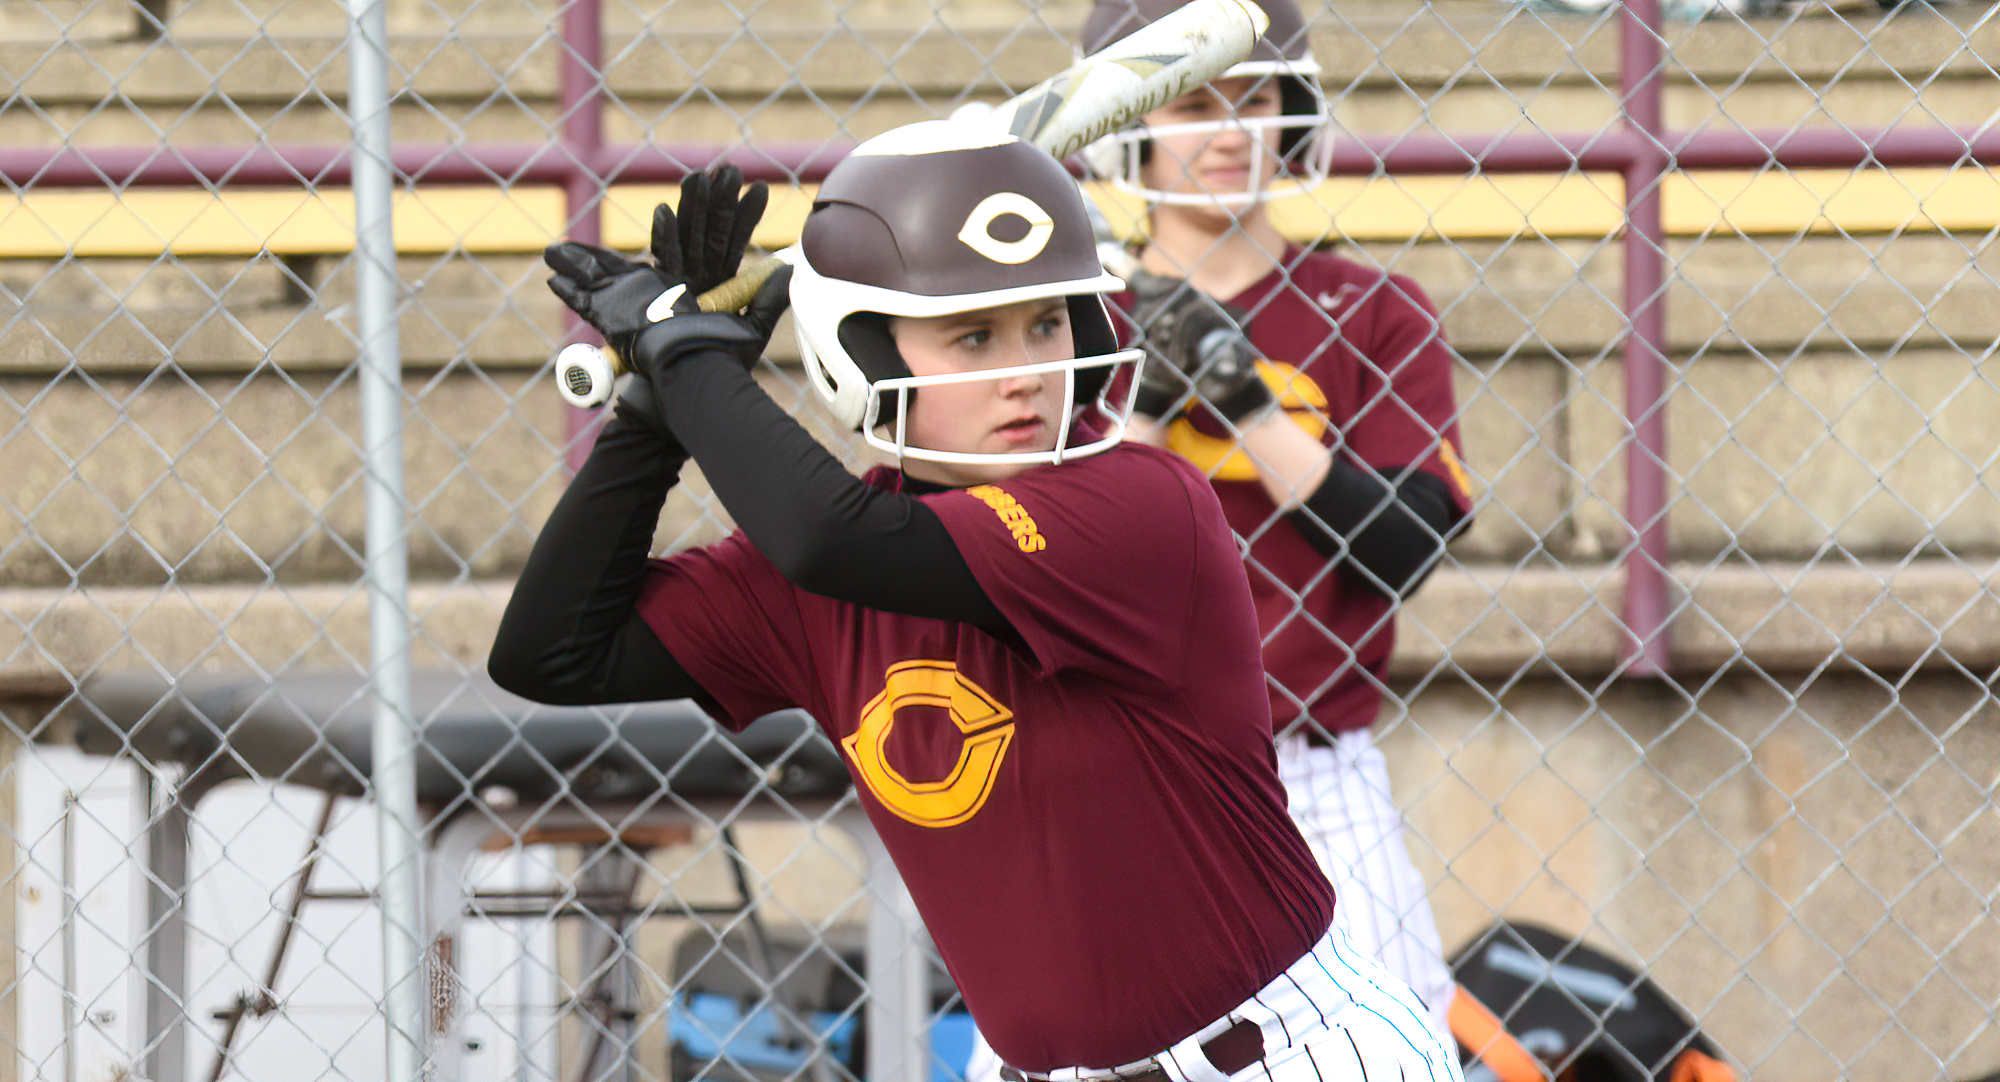 Emma Redlin hit her first college home run in the Cobbers' MIAC opener at St. Mary's. She also had a hit in both games to push her hit streak to four.